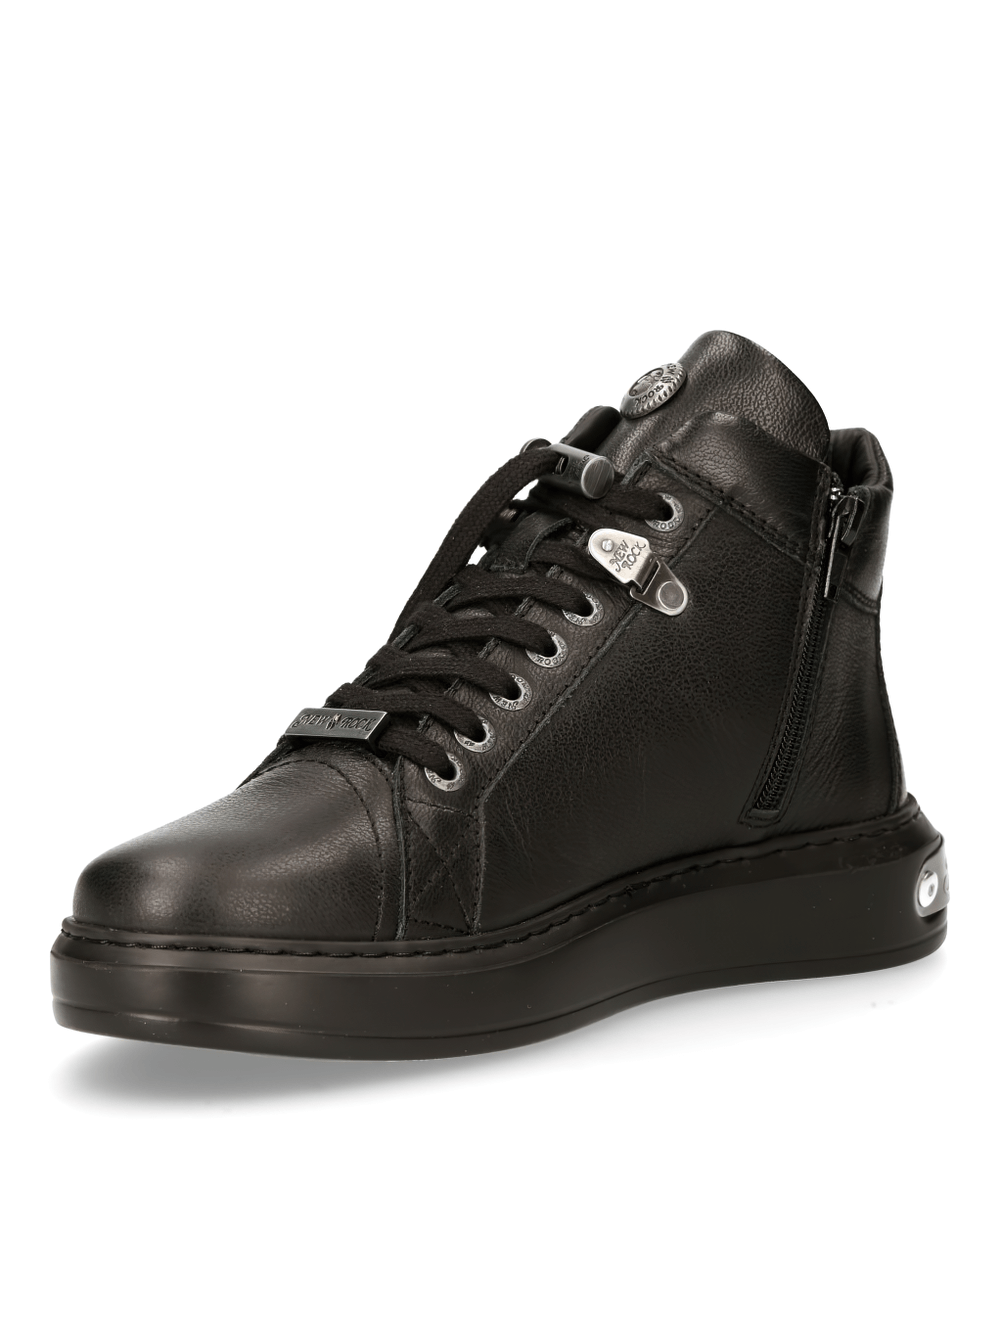 NEW ROCK Black Lace-Up Boots with Metallic Details